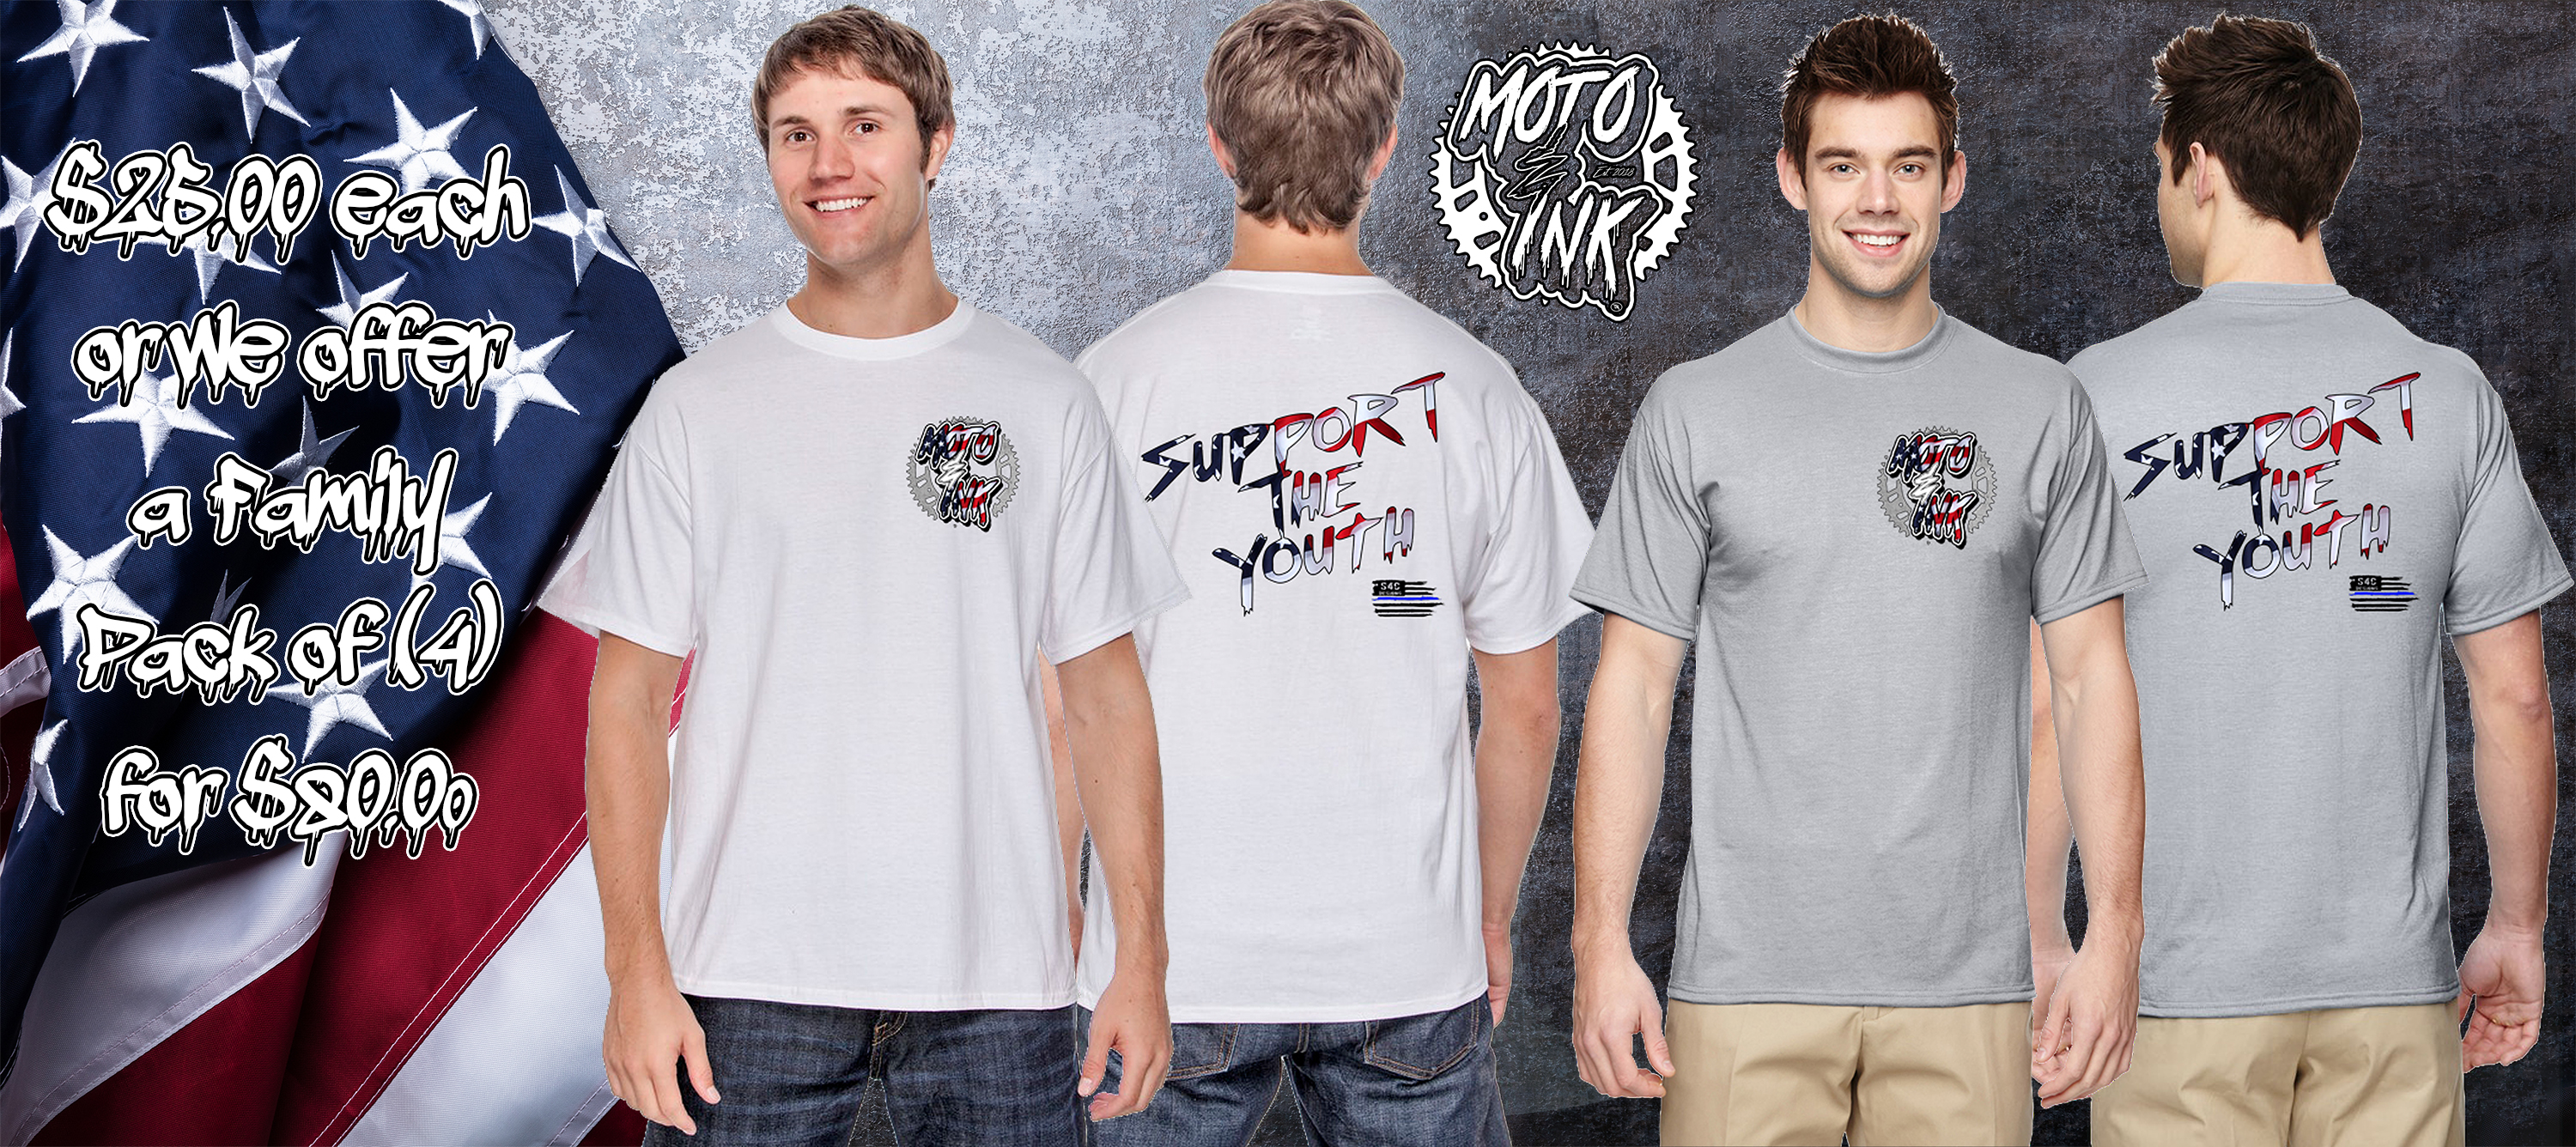 Moto&Ink Support The Youth Program Limited Edition 4Th Of The July T-Shirts!